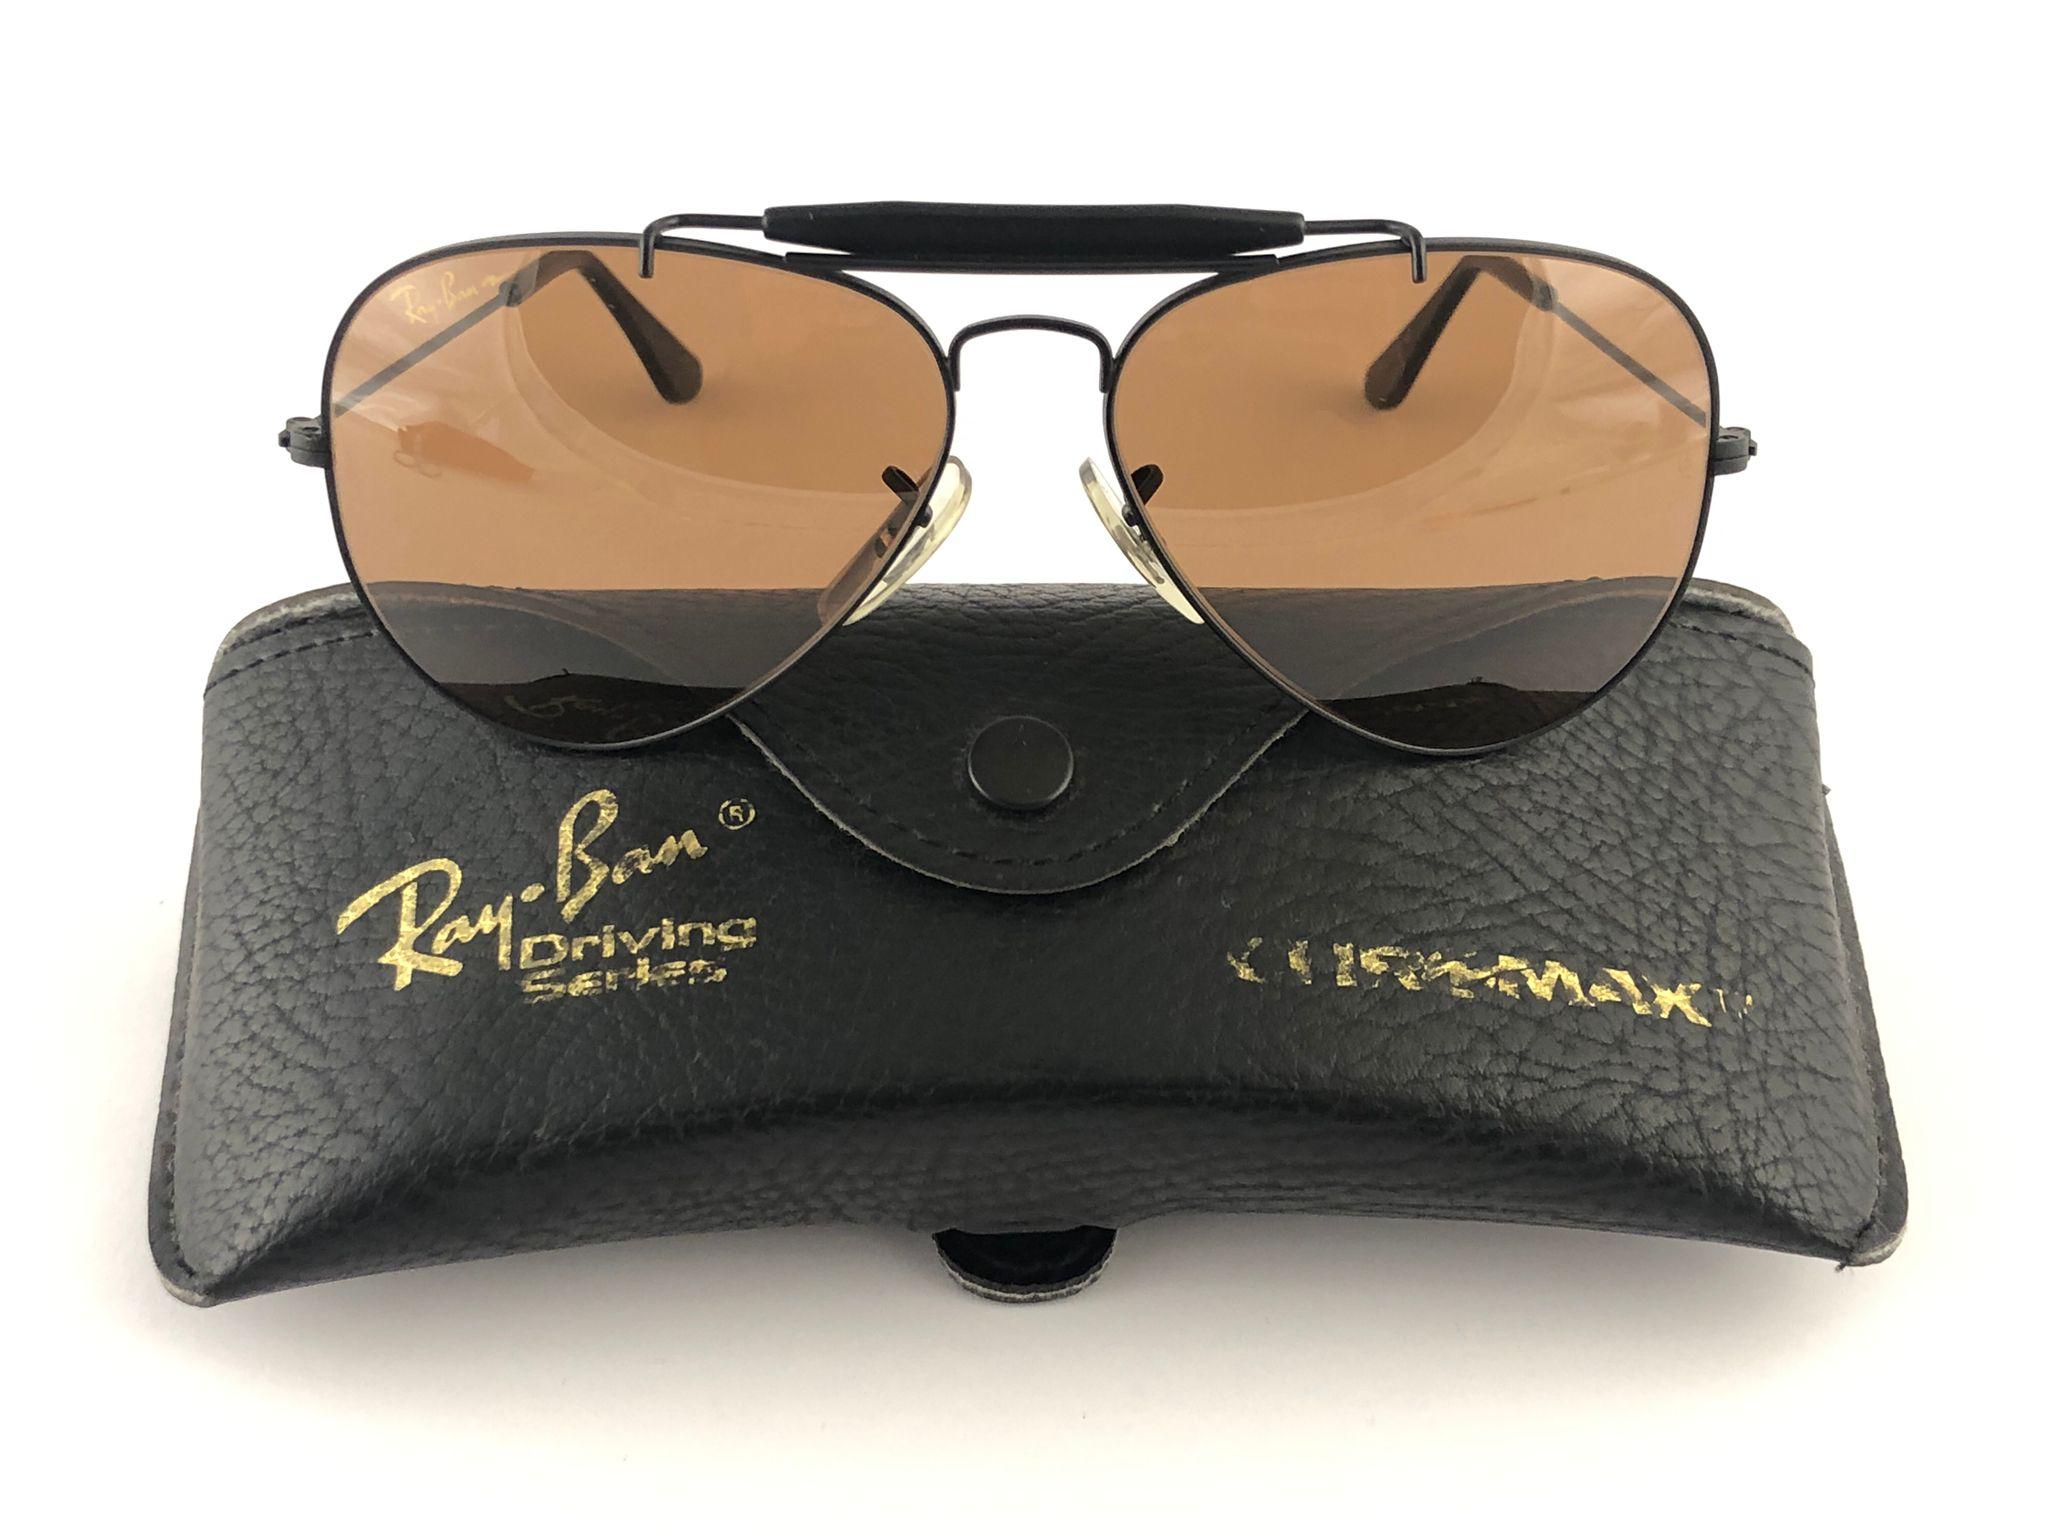 New, rare and sought after Vintage Ray Ban Chromax. 58MM Outdoorsman gold frame holding a pair of Chromax B&L etched lenses.

New, never worn or displayed, this item is a superb find.
It may have minor sign of wear due to storage. 
Comes with its